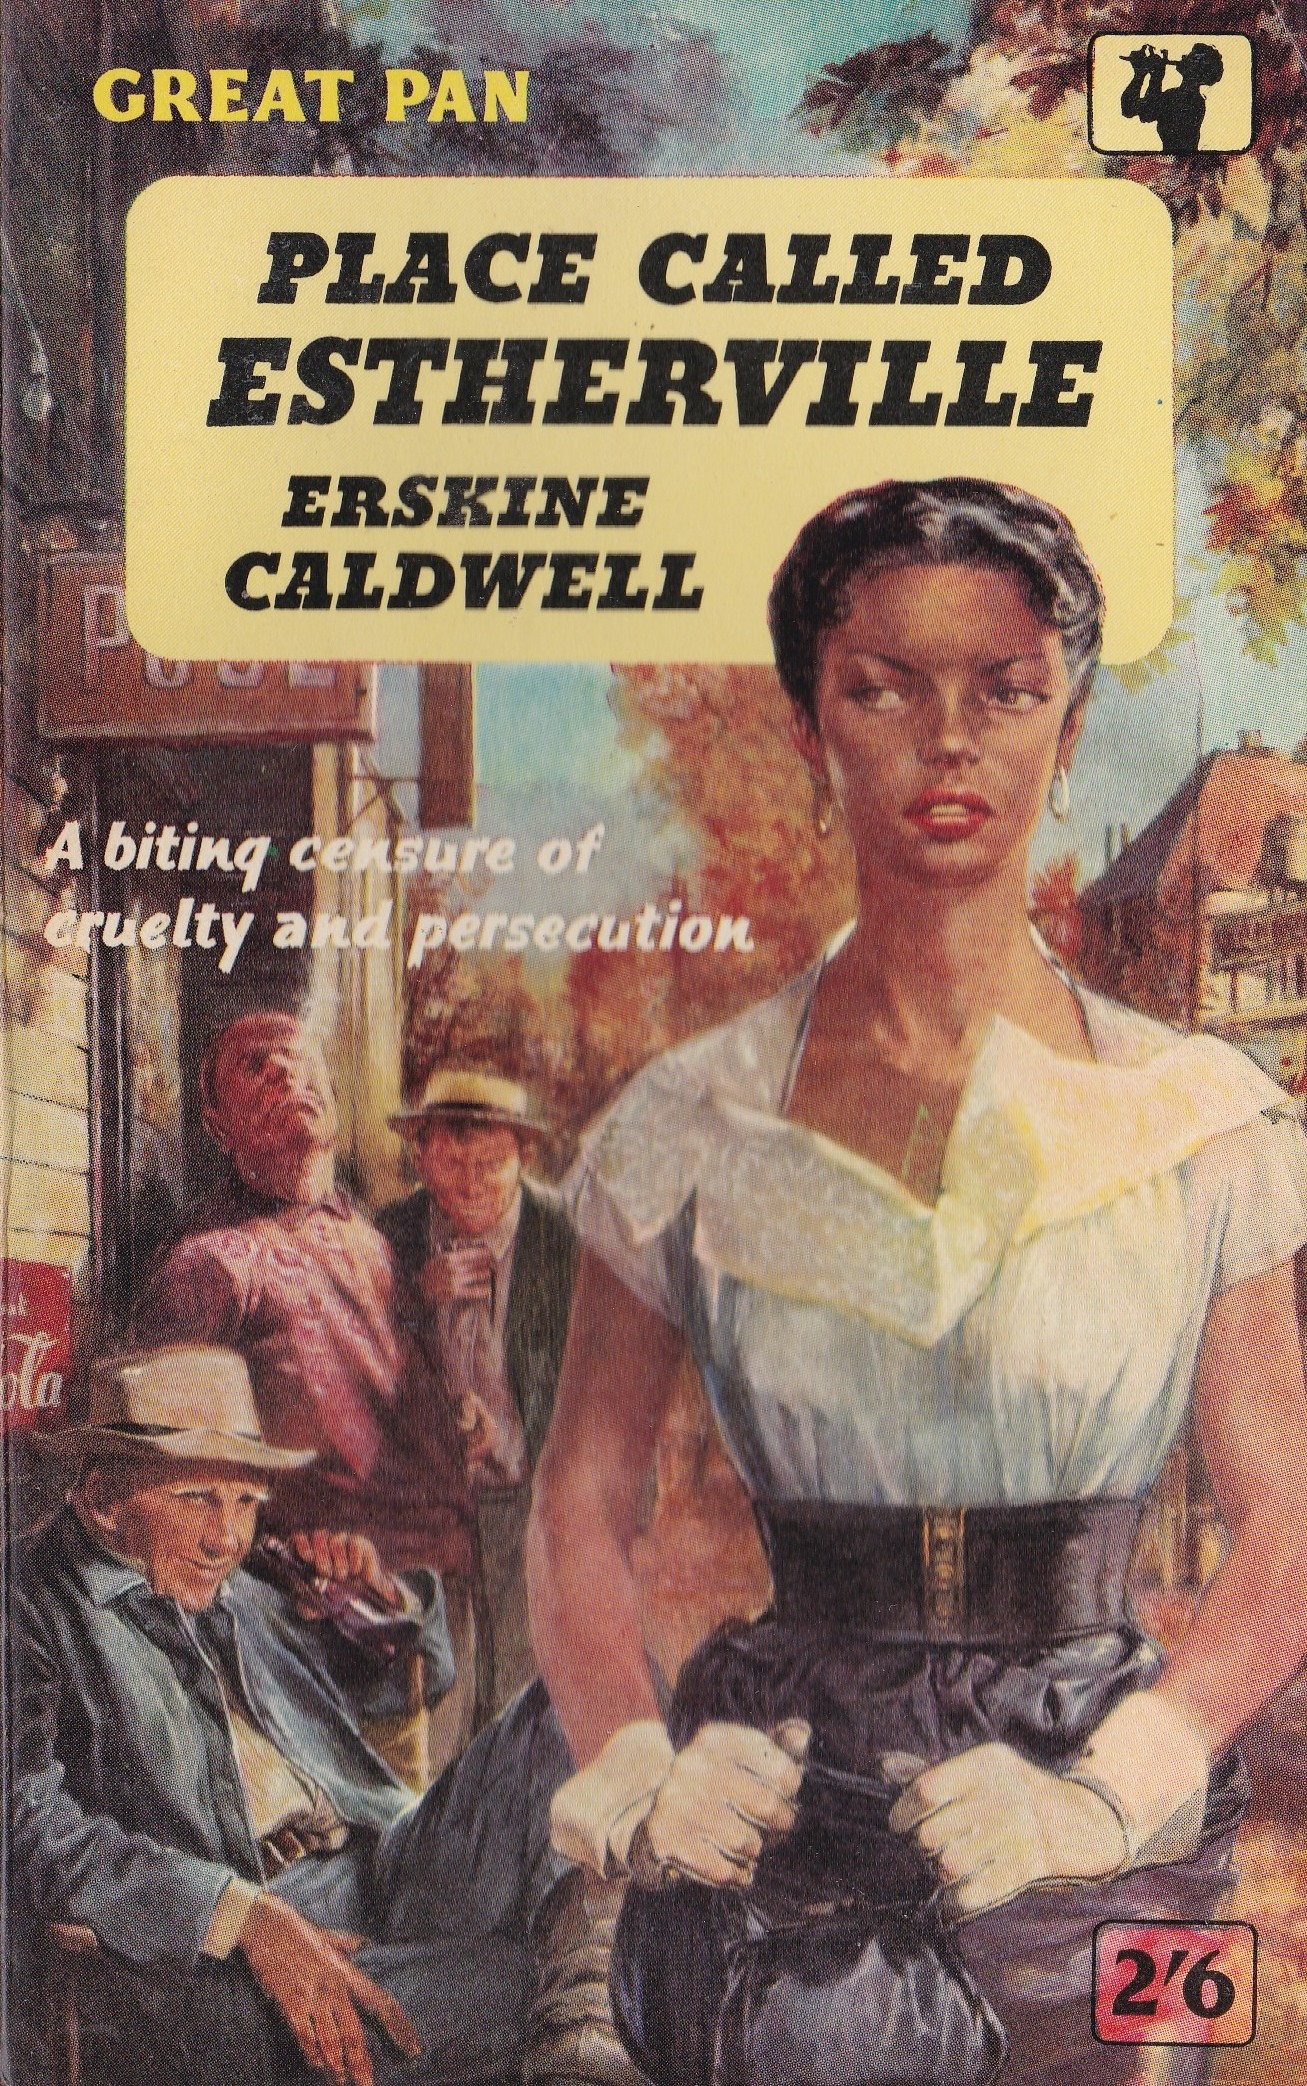 the cover of the book, peace called erskine by edward cabwell